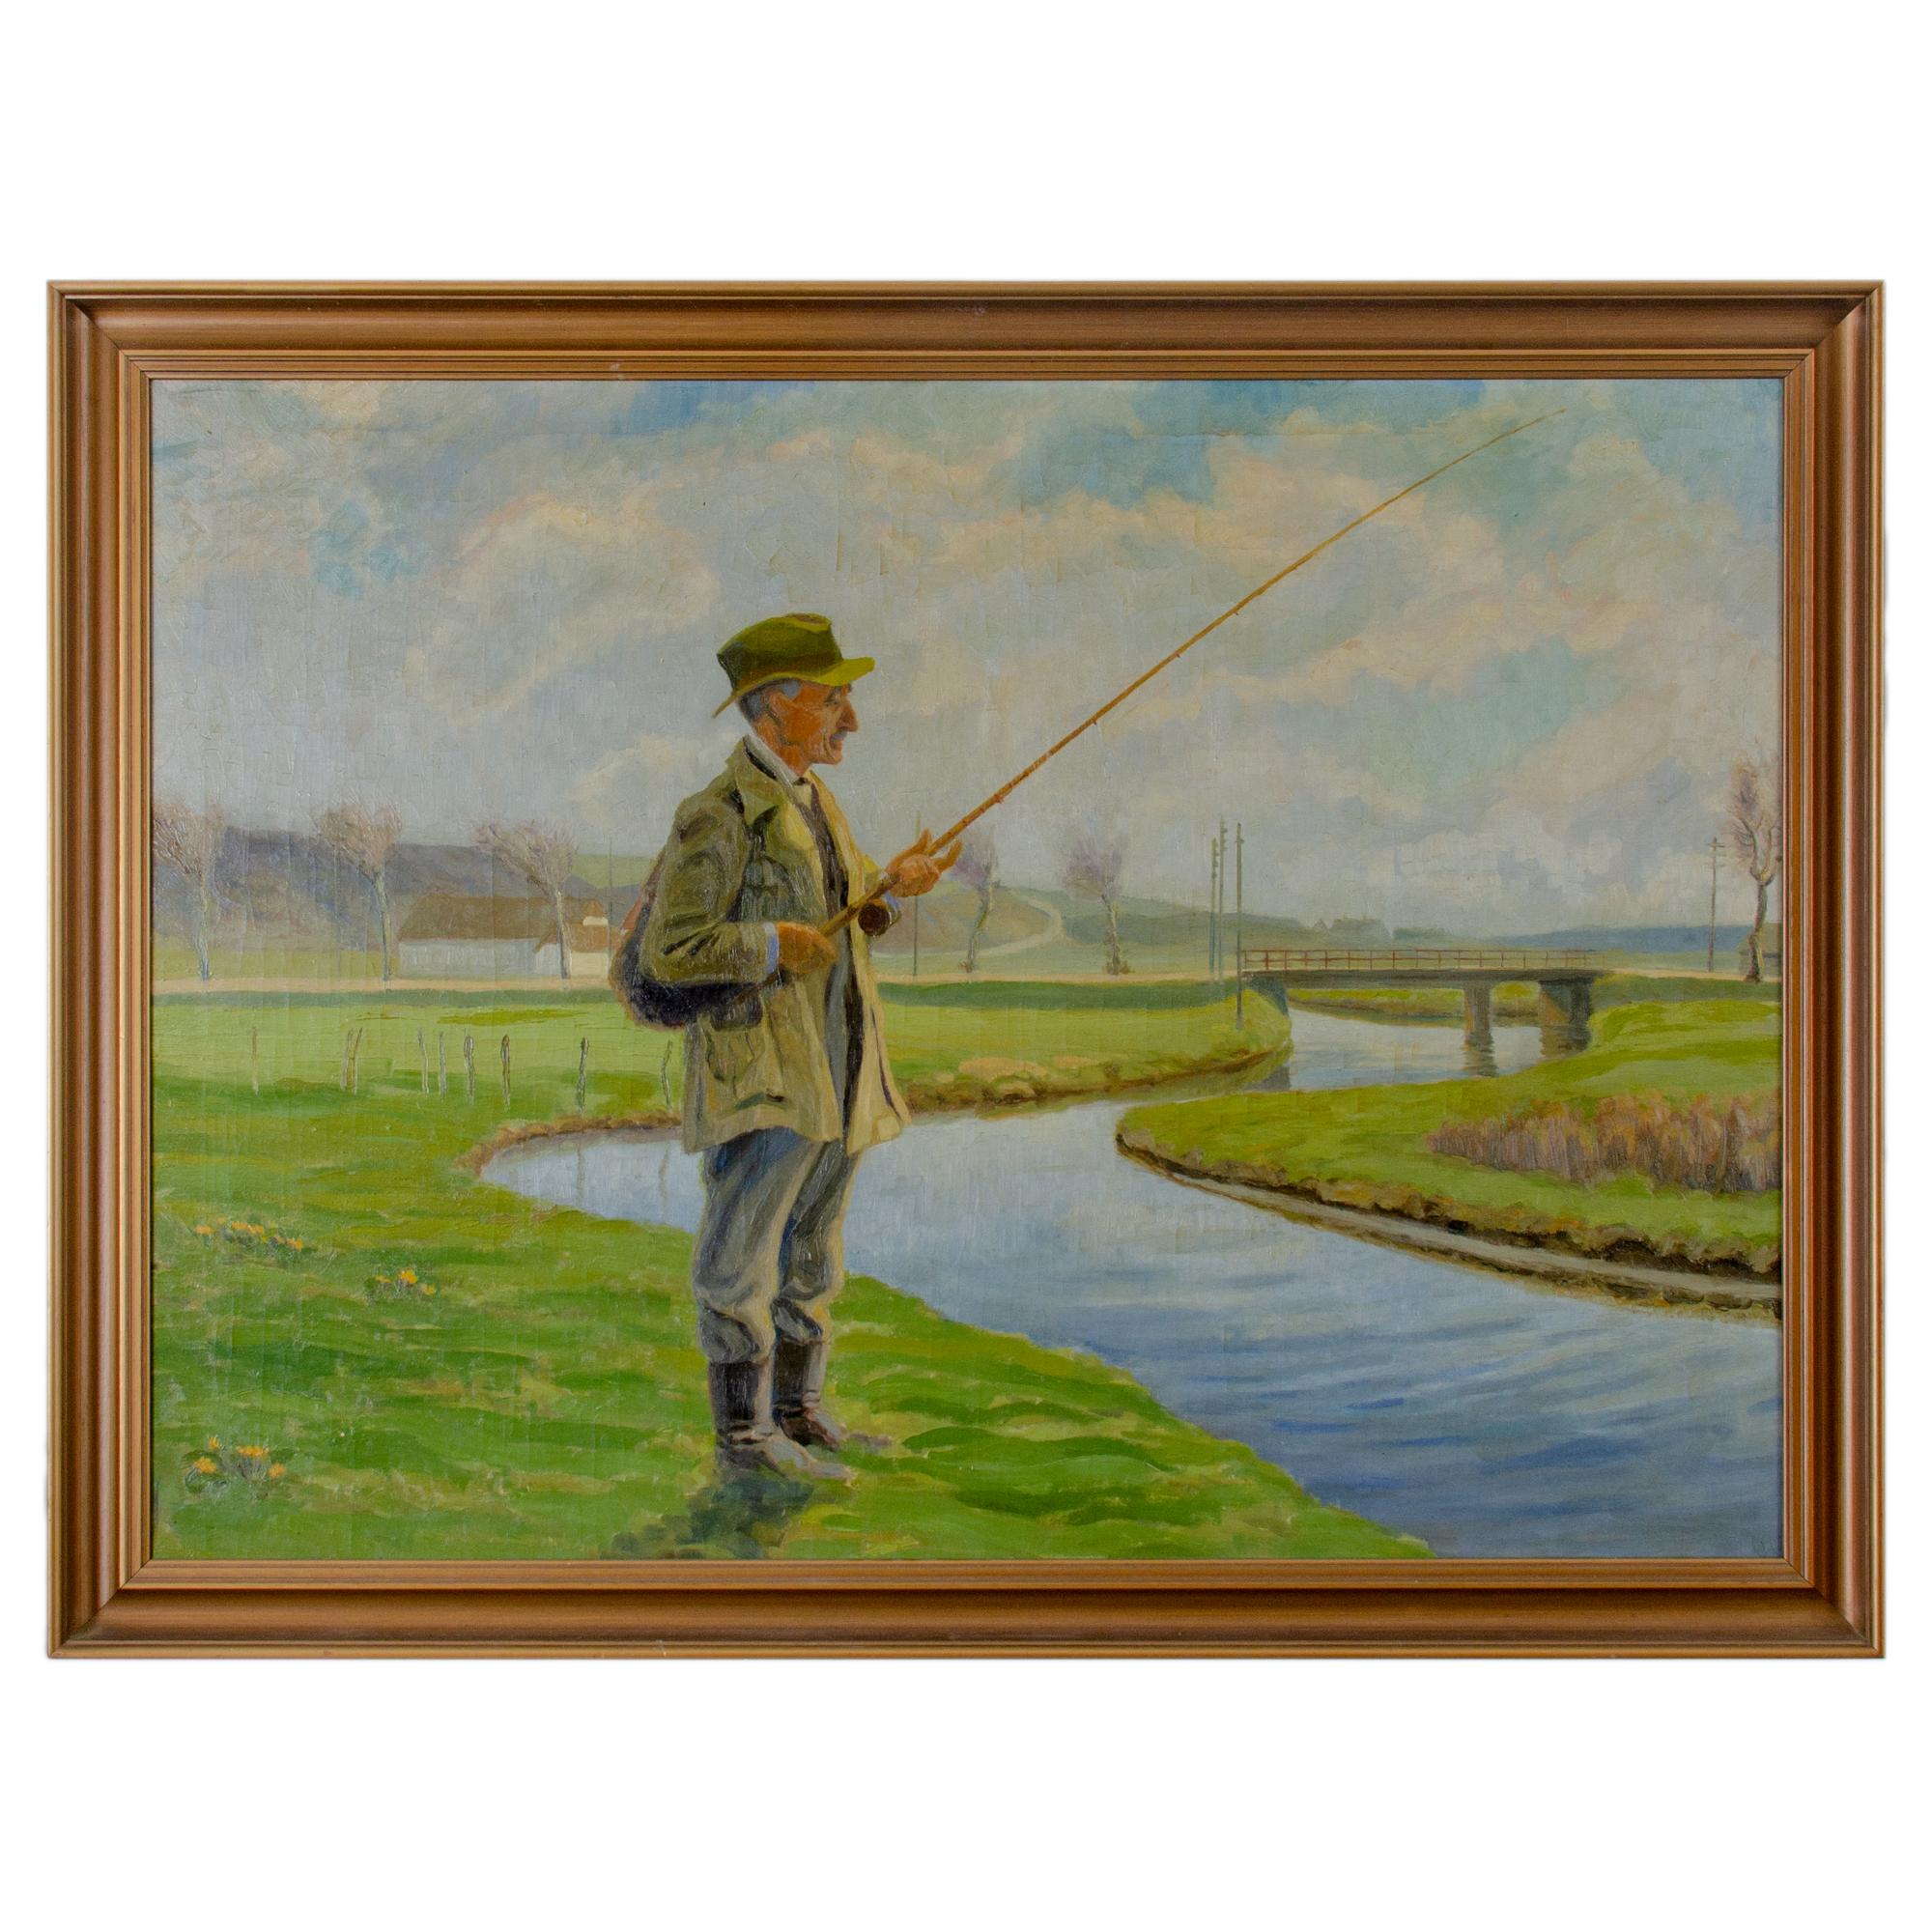 A large oil on canvas of a gentleman fishing by a stream in a rustic countryside, mid 20th century.  Unsigned, from a collection of Scandinavian paintings.

Sight: 43 ½ by 32 inches
Frame: 47 ½ by 36 inches

